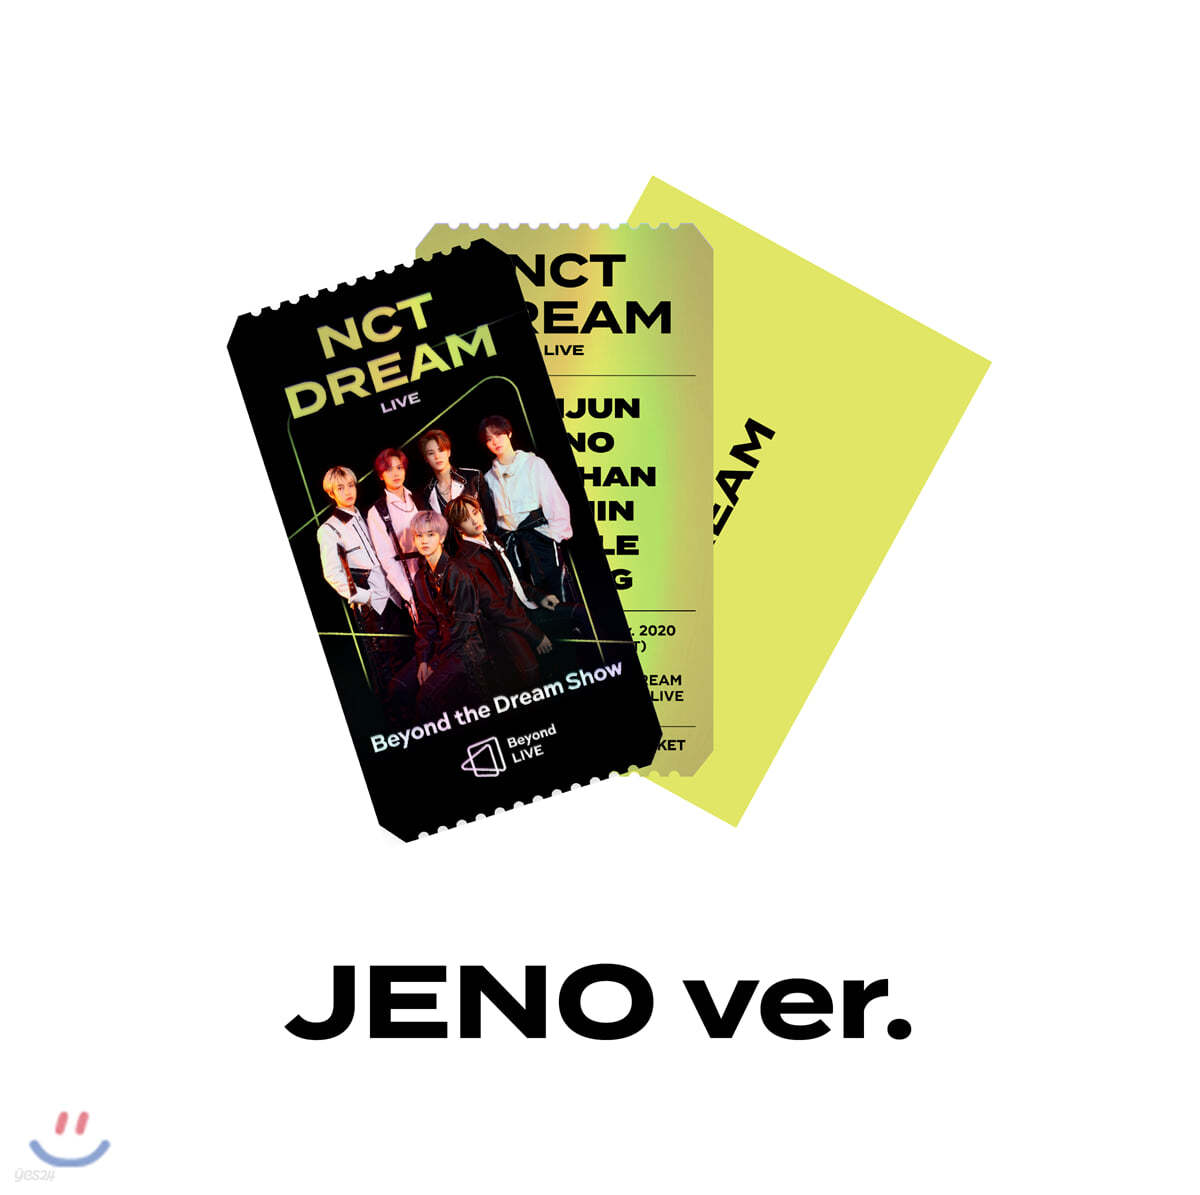 [JENO] NCT DREAM Beyond LIVE Beyond the Dream Show SPECIAL AR TICKET SET